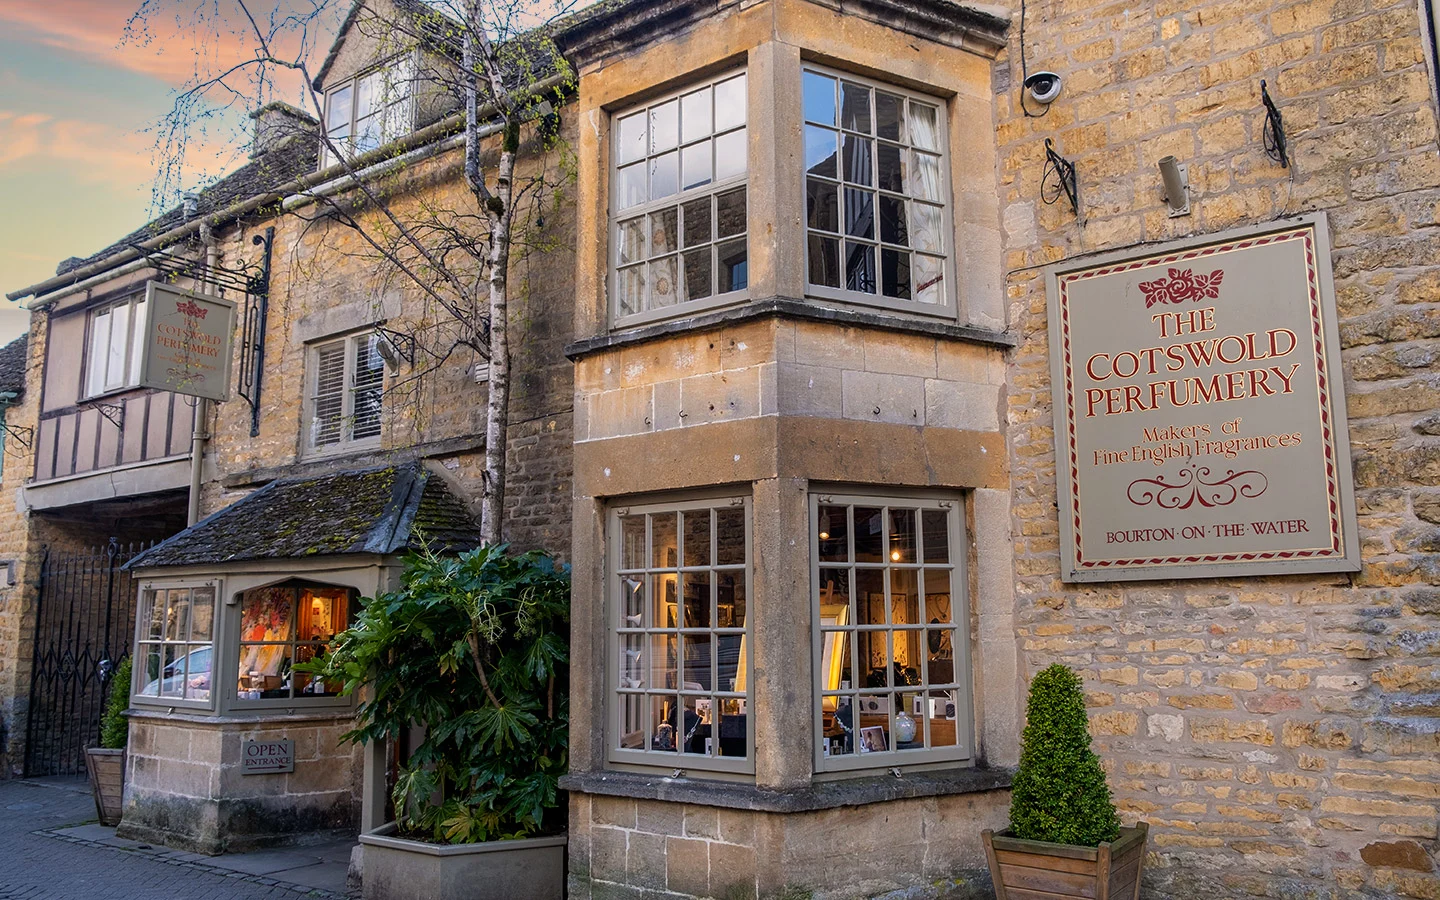 The Cotswold Perfumery in Bourton-on-the-Water